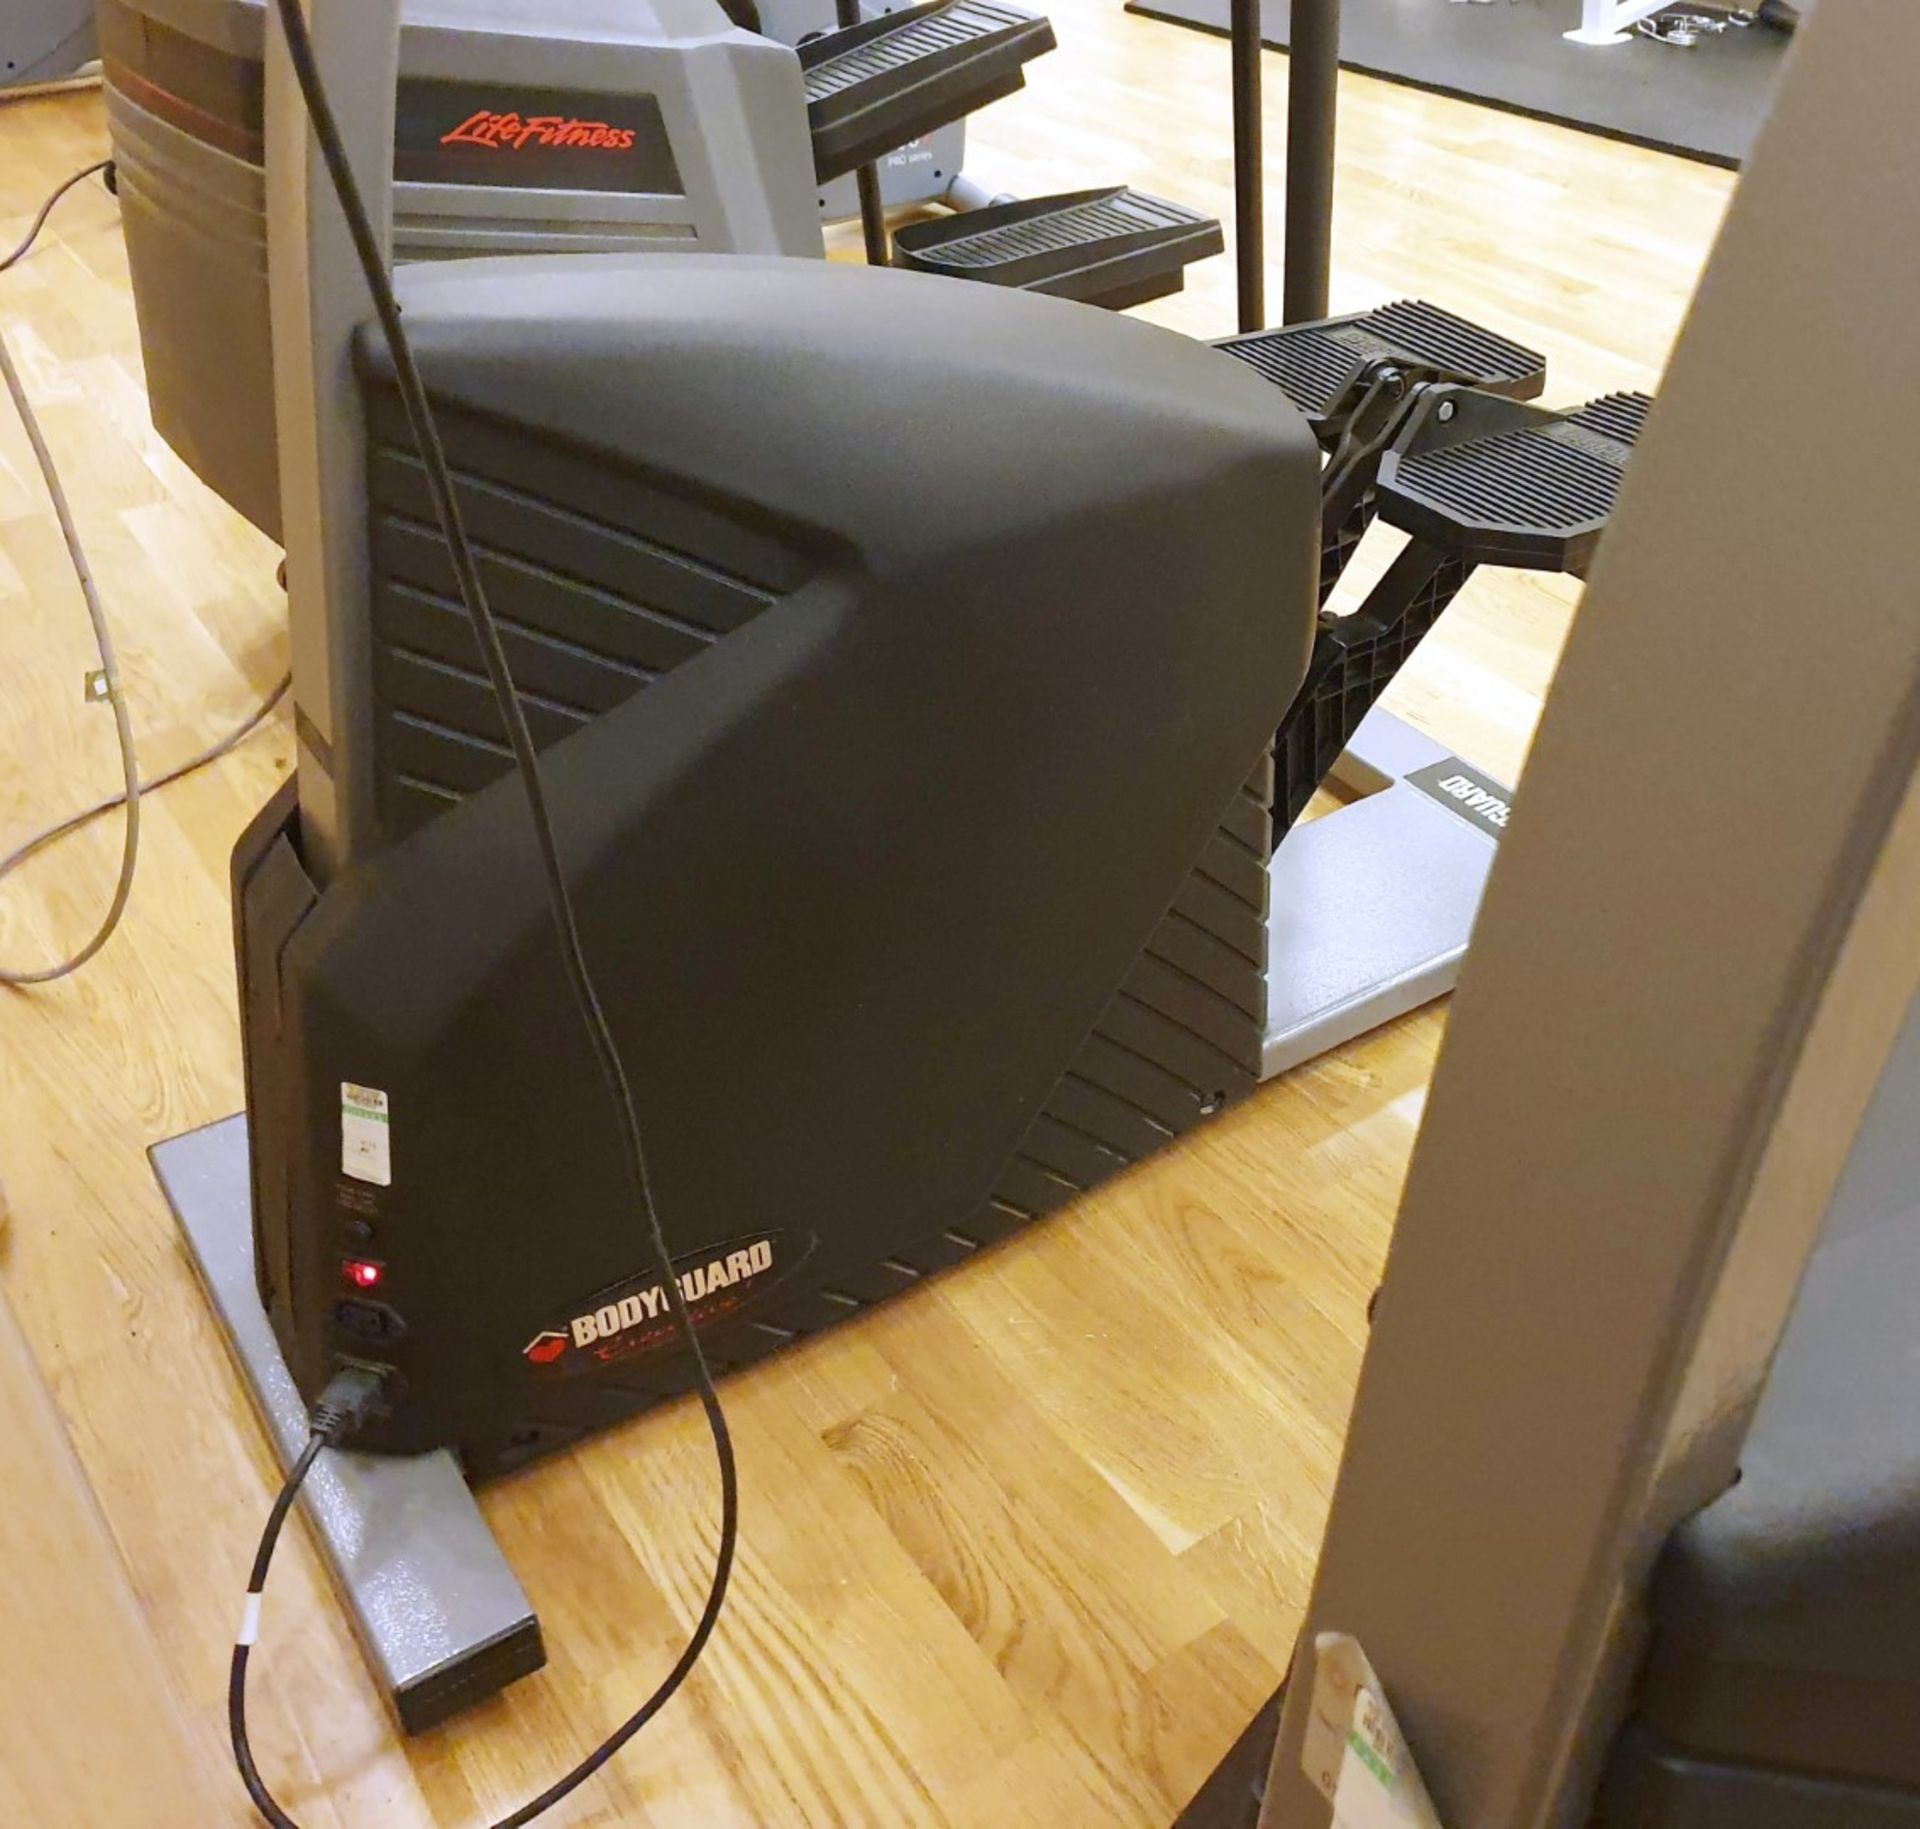 1 x Bodyguard Fitness Stepper - Part No F97420120 - CL552 - Location: West Yorkshire - Image 6 of 6